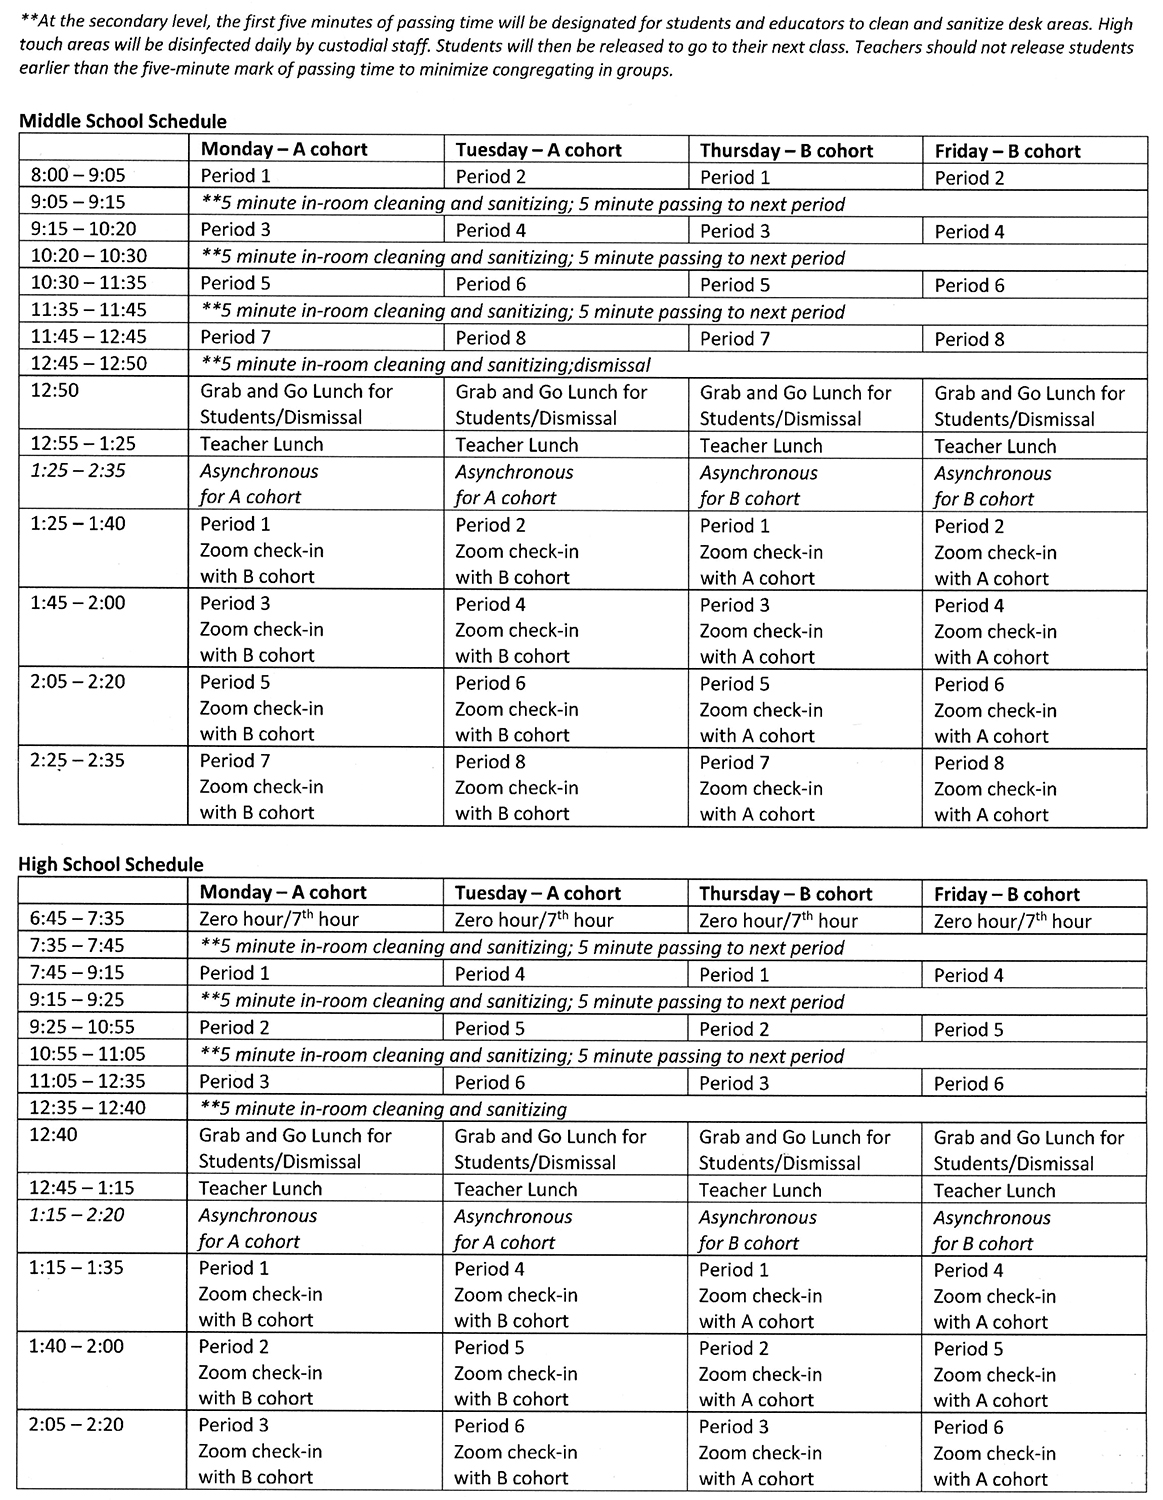 Secondary Hybrid Schedule - Final